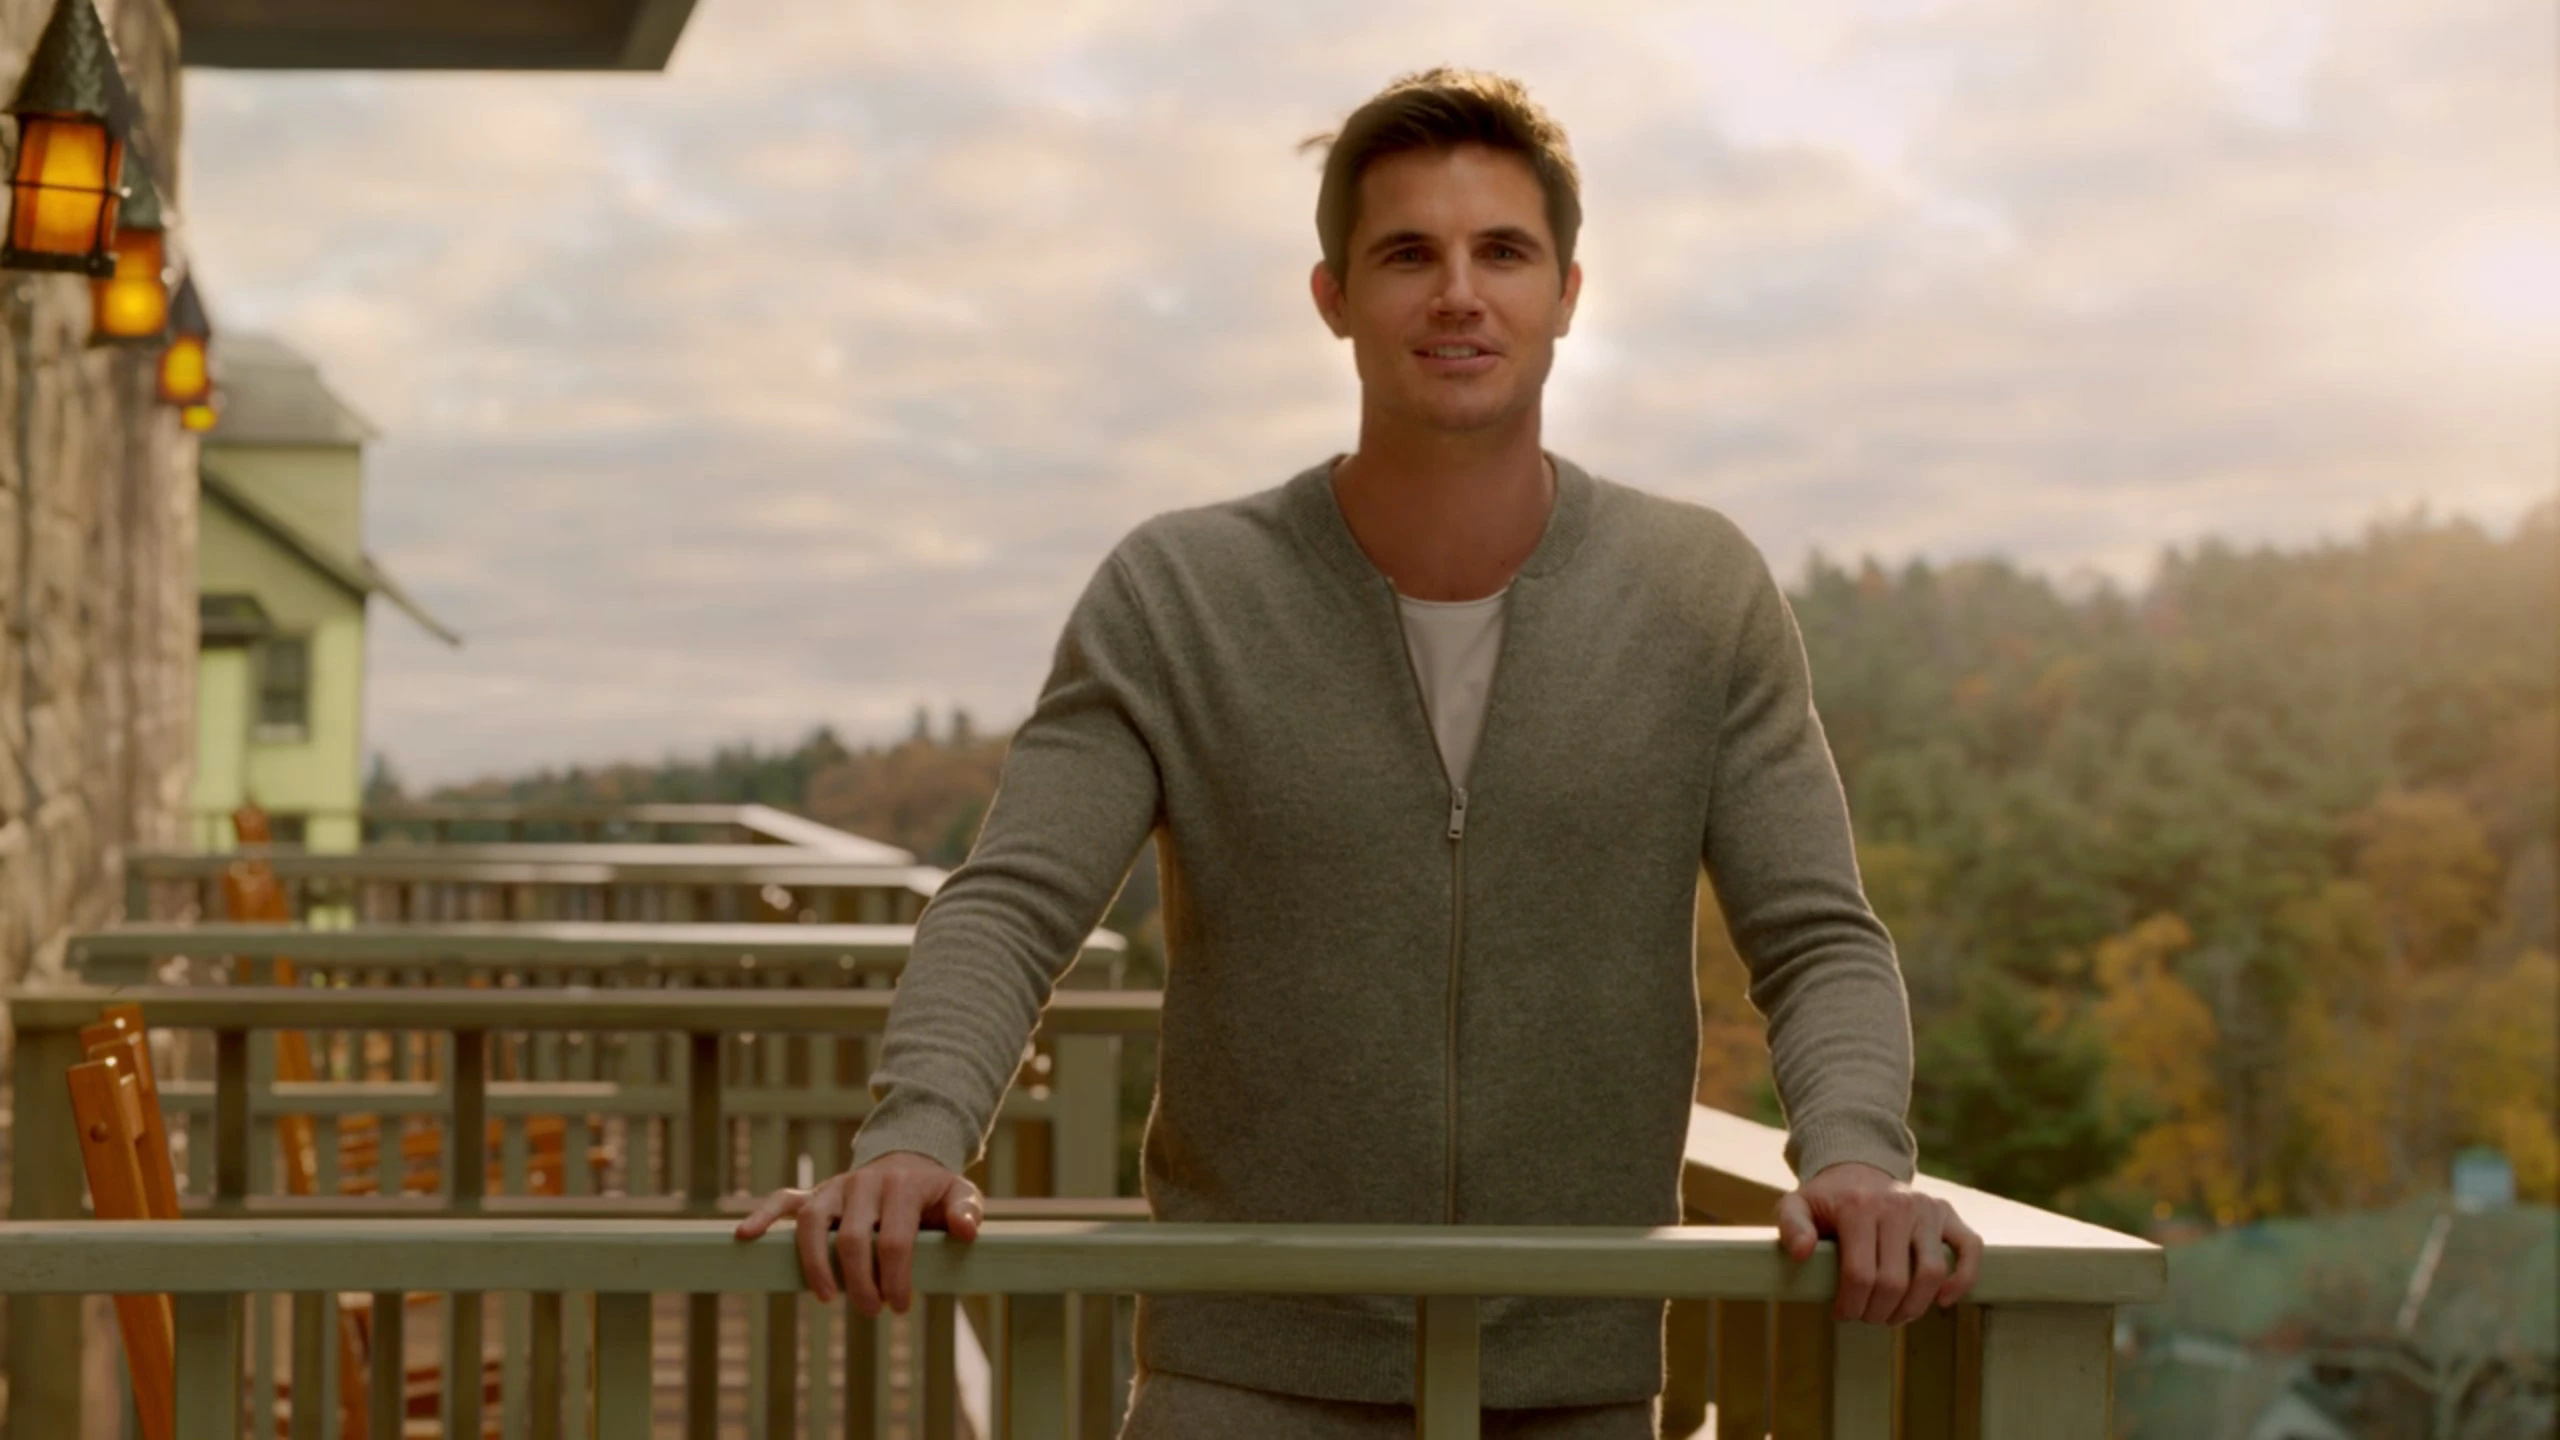 Upload (TV Series): Robbie Amell as Nathan Brown, a 27-year-old computer engineering grad. 2560x1440 HD Wallpaper.